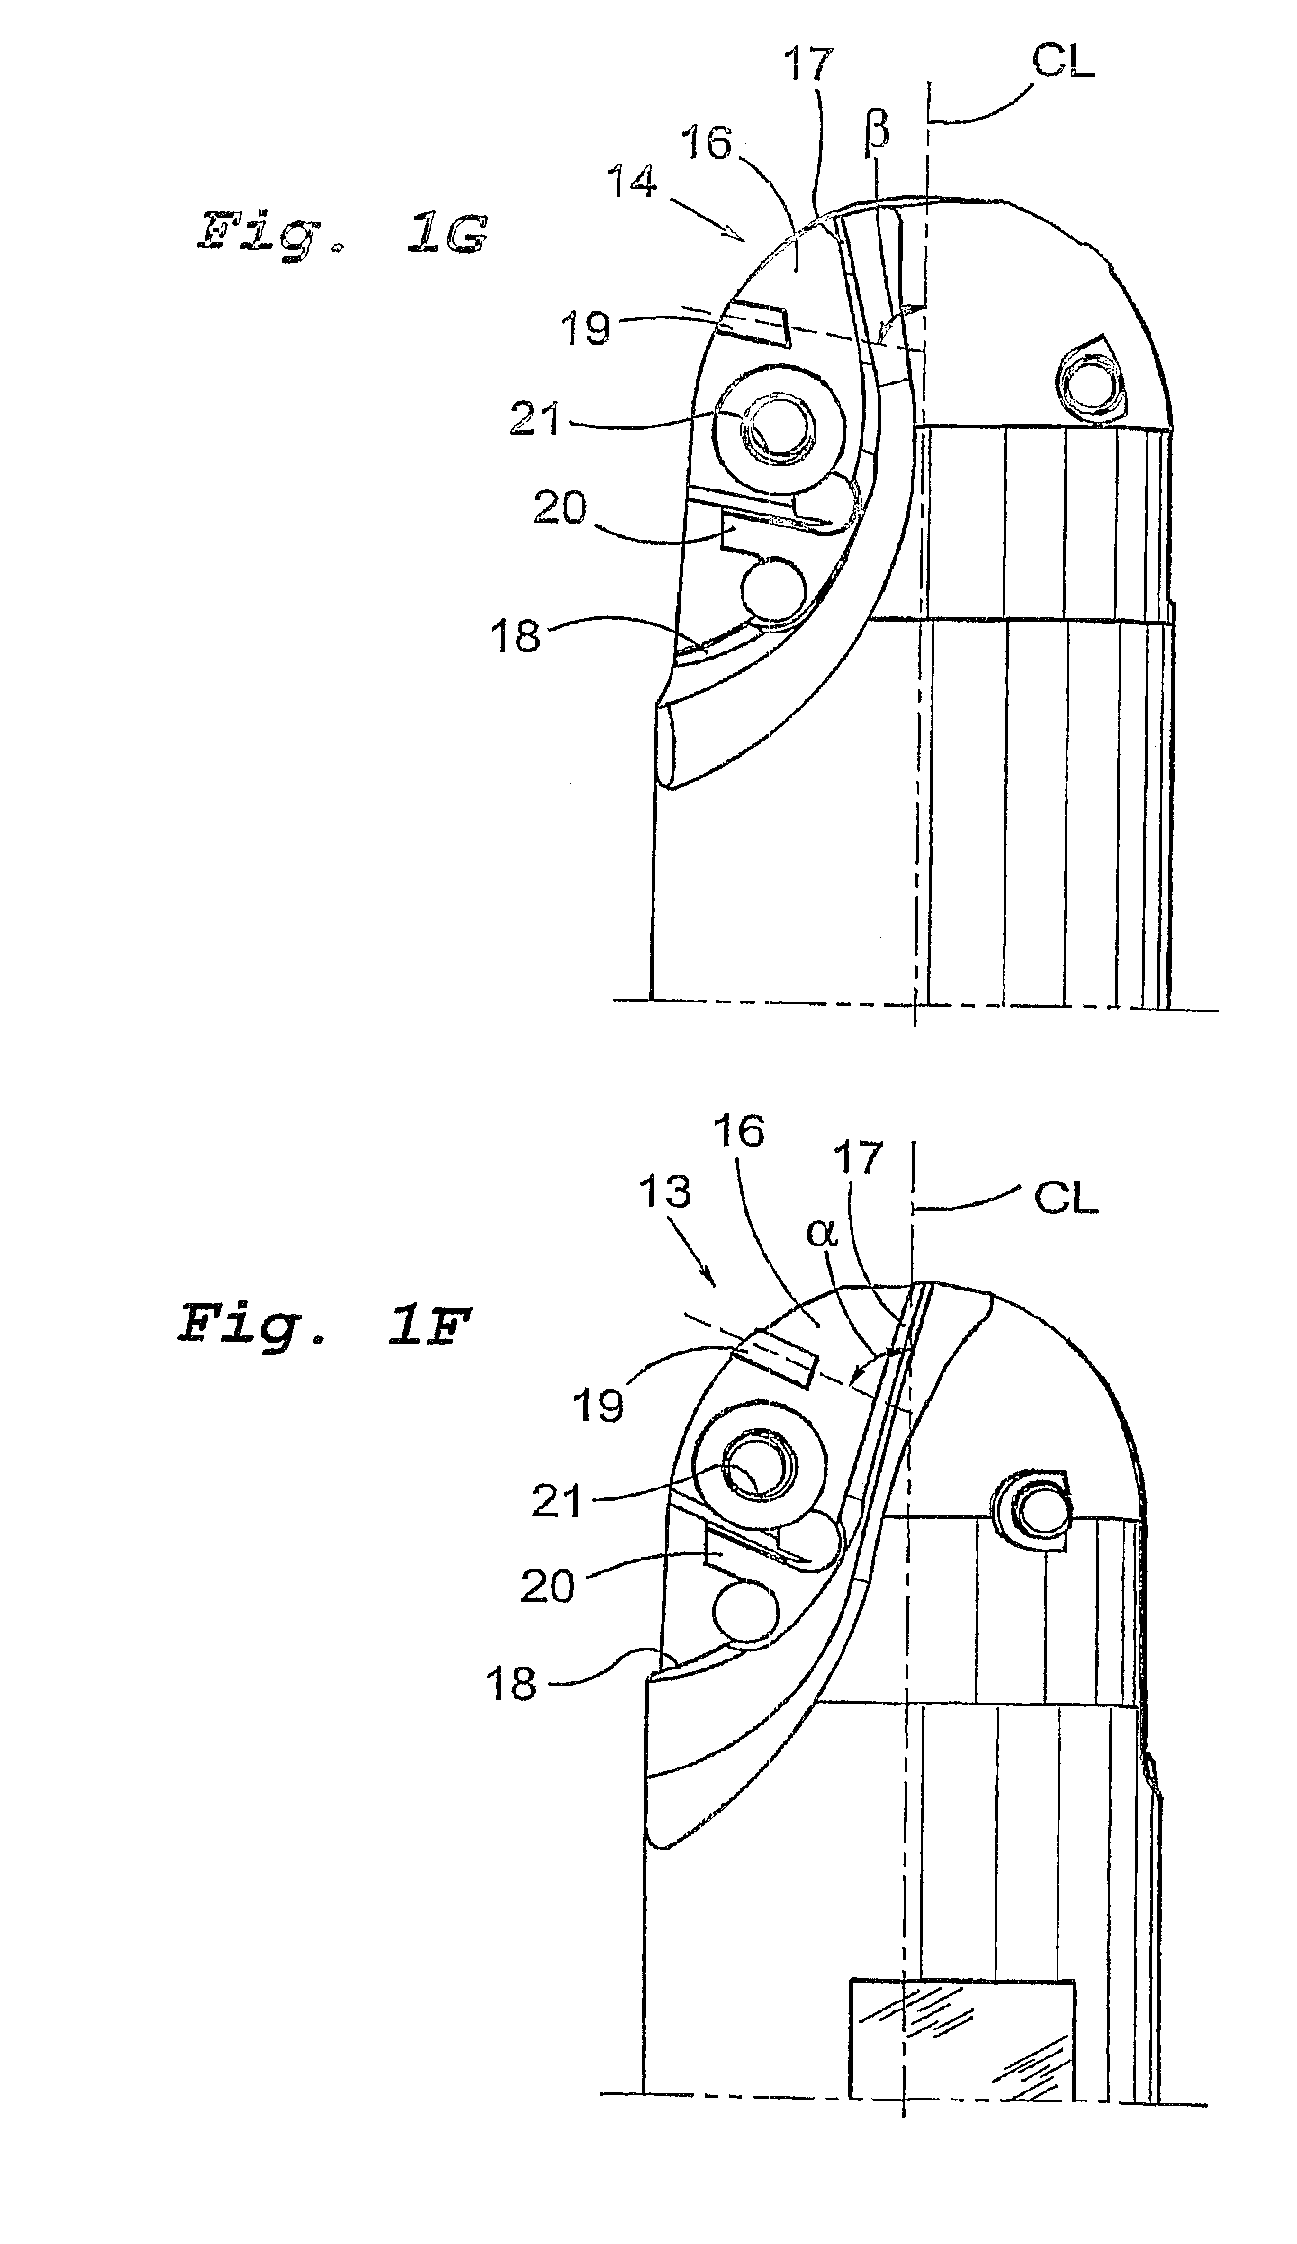 A milling tool with cooperating projections and recesses between the cutting insert and the holder